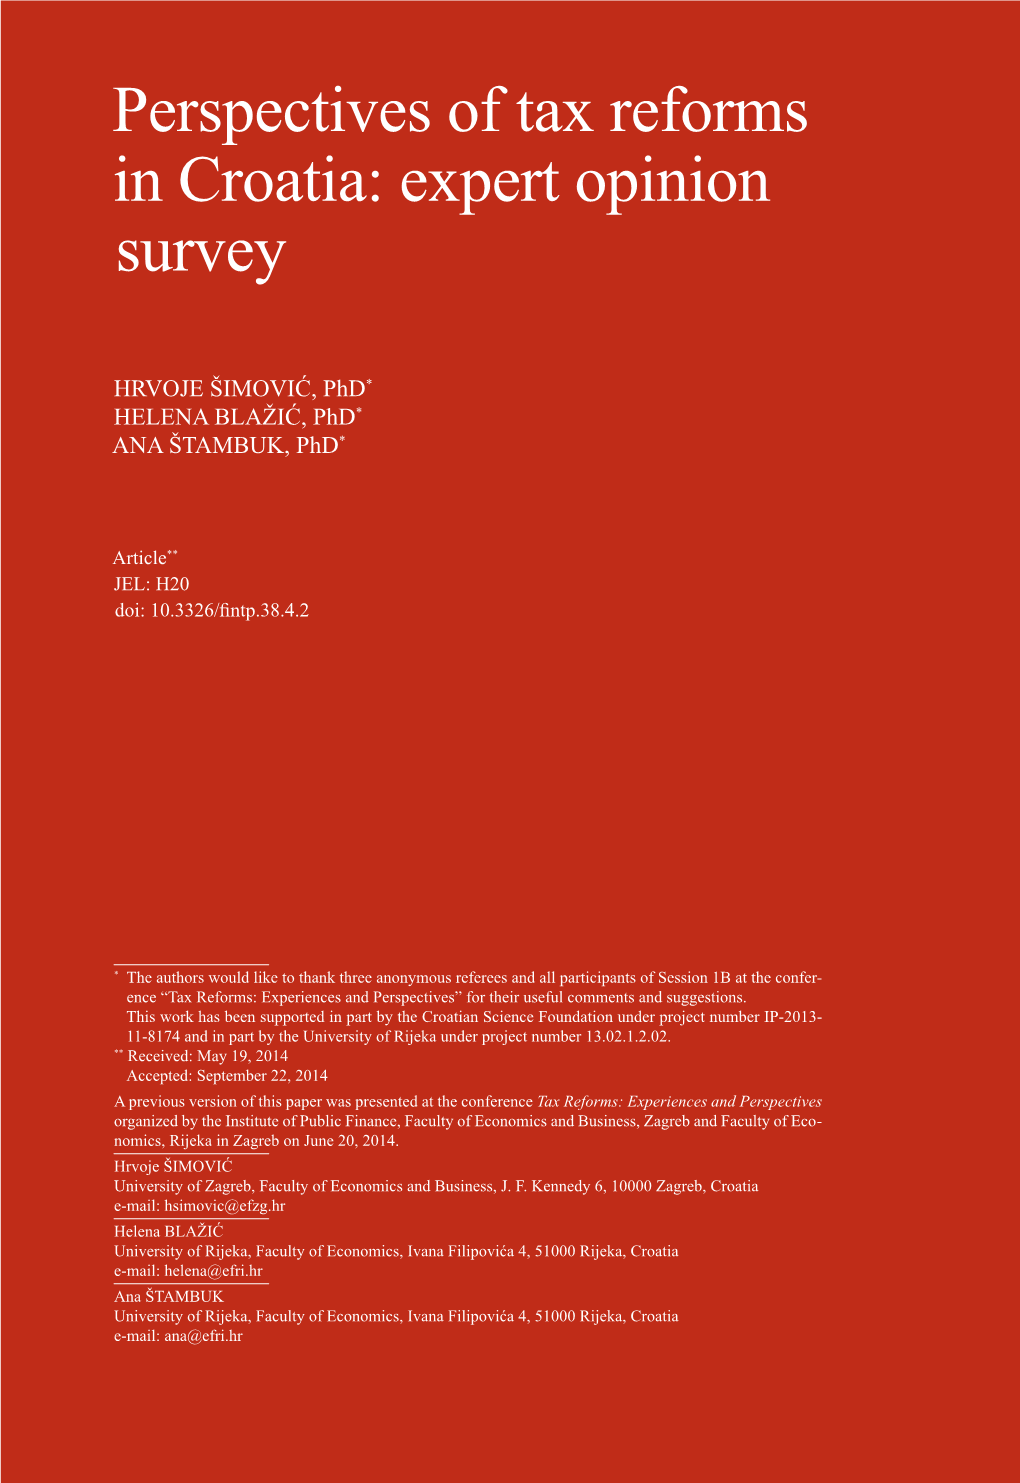 Perspectives of Tax Reforms in Croatia: Expert Opinion Survey